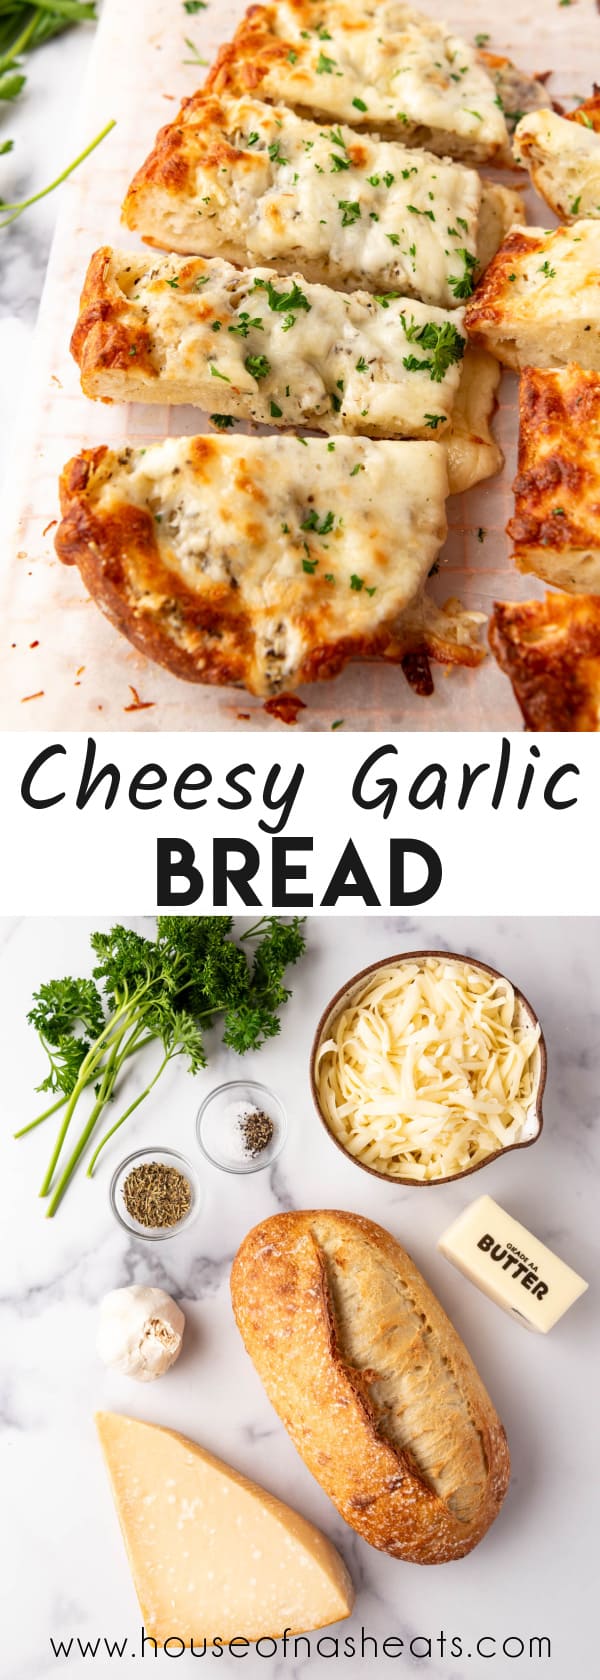 A collage of images of cheesy garlic bread with text overlay.